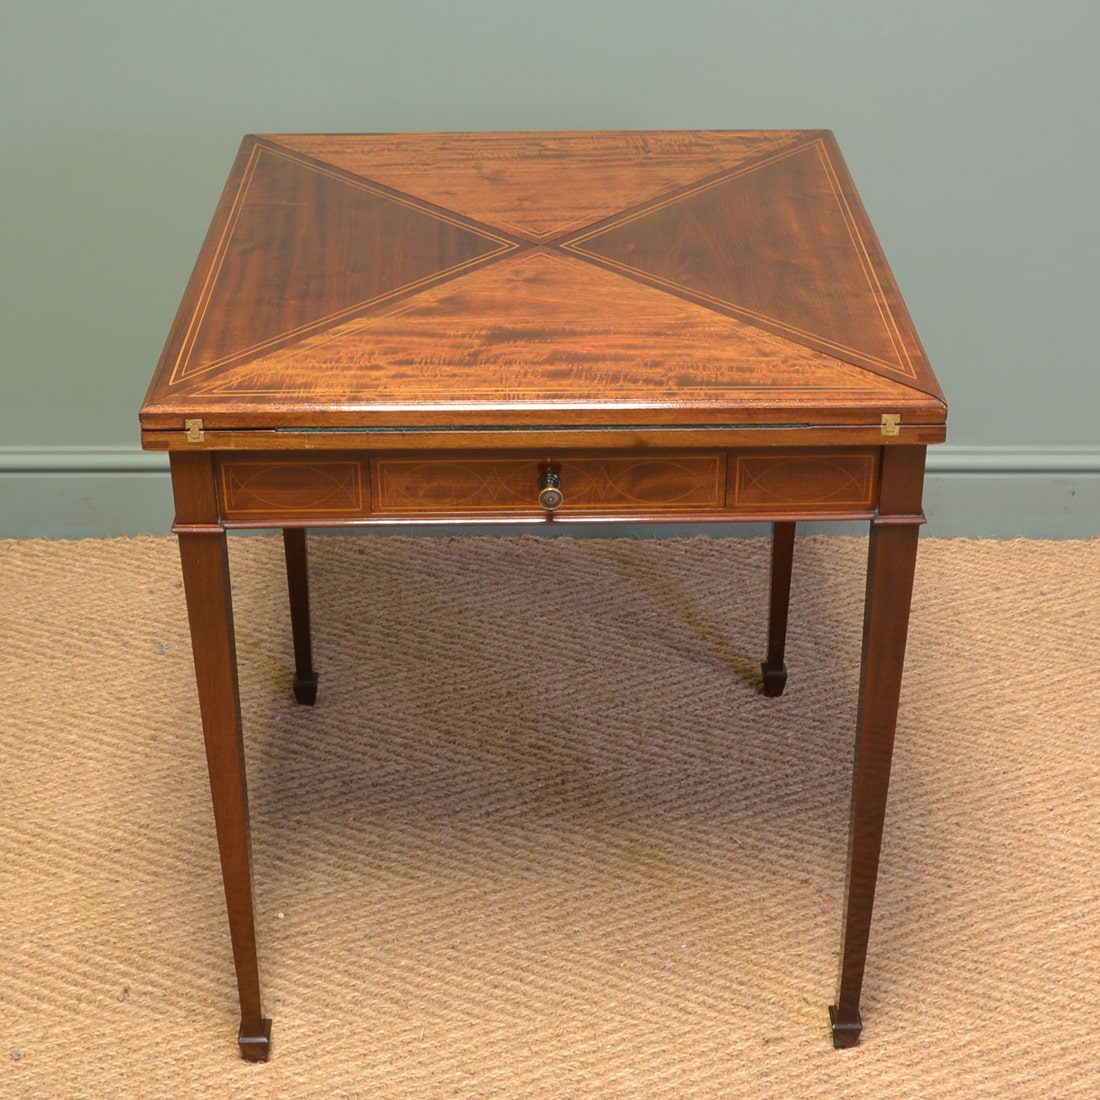 Large Inlaid Envelope Mahogany Antique Card / Games Table.